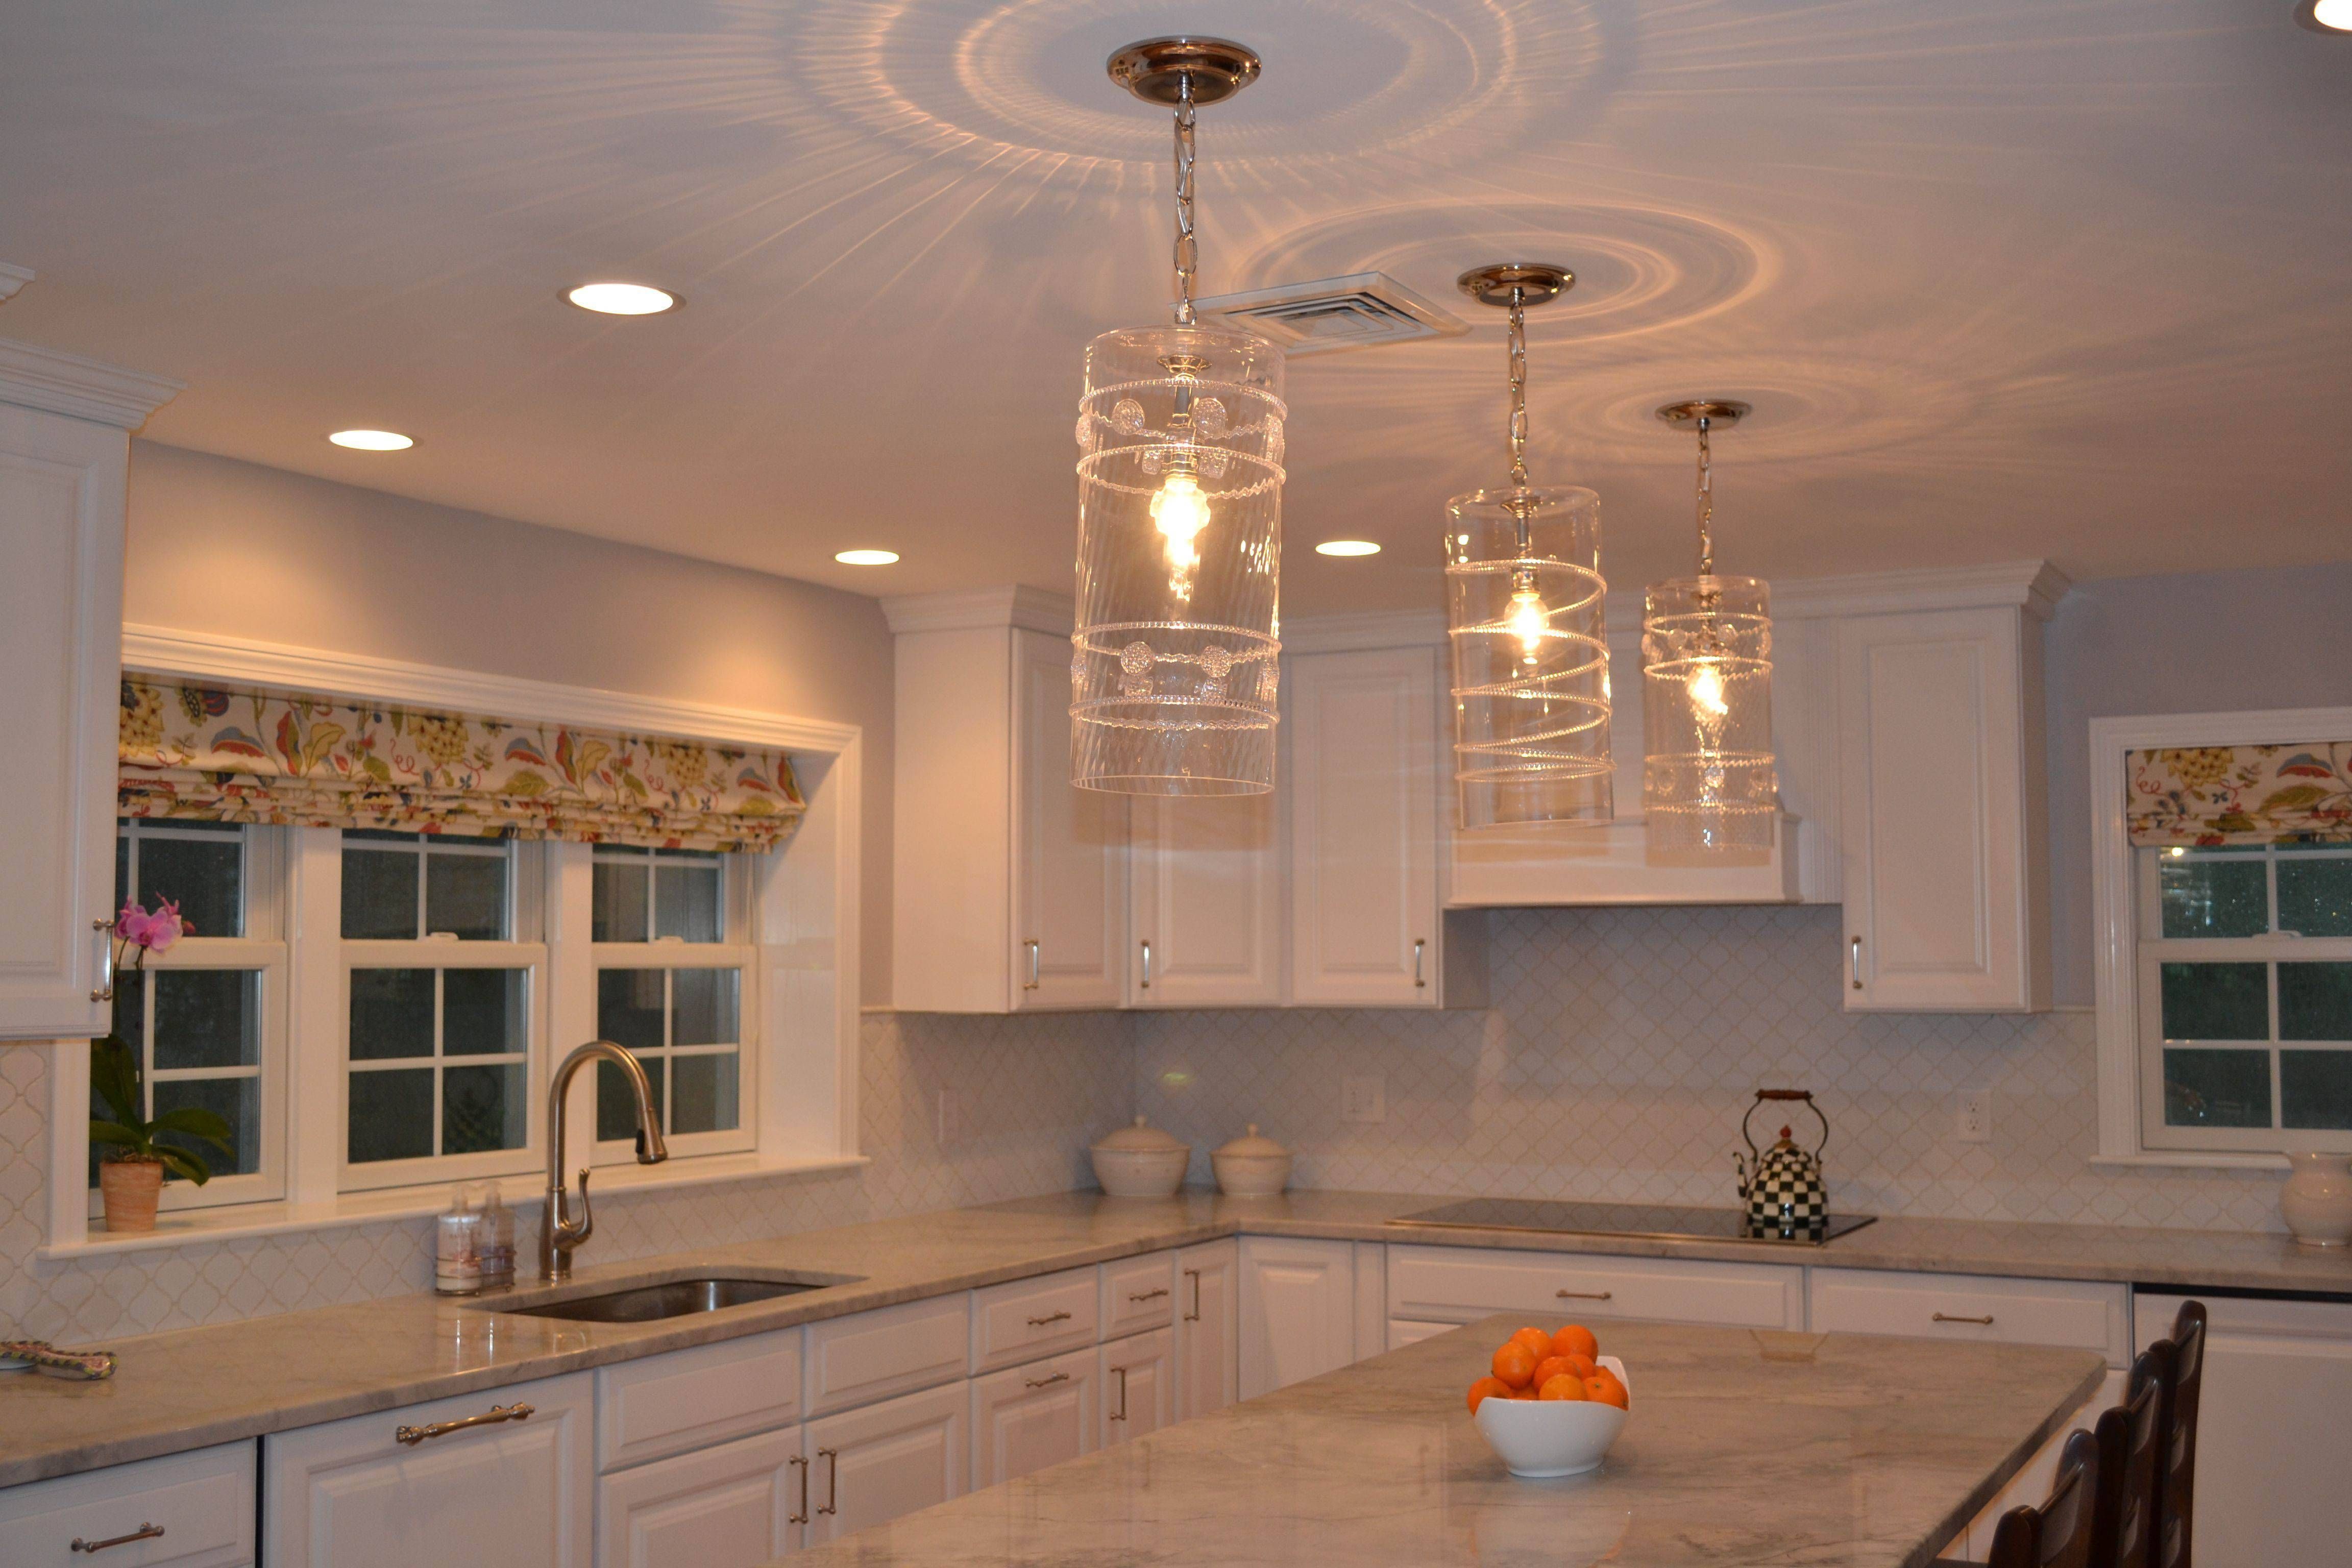 Kitchen Pendant Lights Over Island Luxury In Clear Glass Light Intended For Pendant Lighting Over Island 